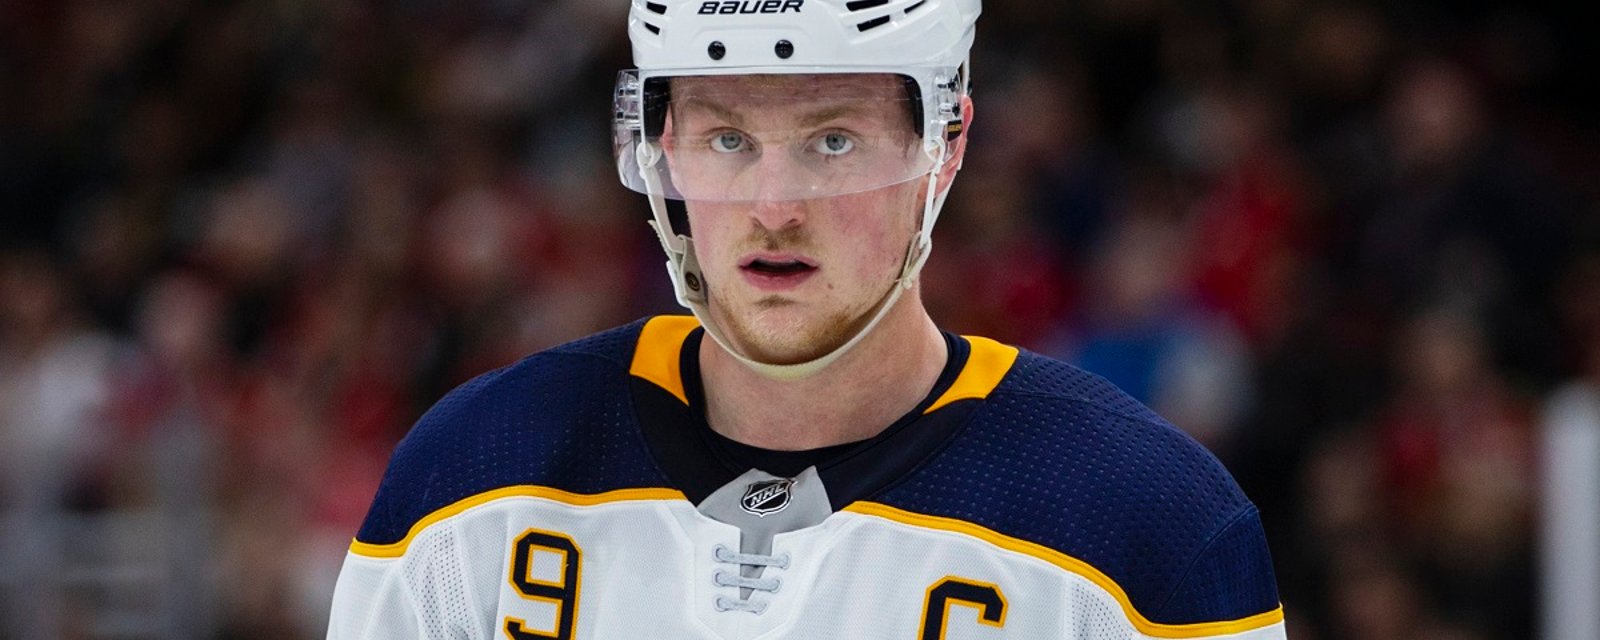 Rumor: Jack Eichel has demanded a trade out of Buffalo.